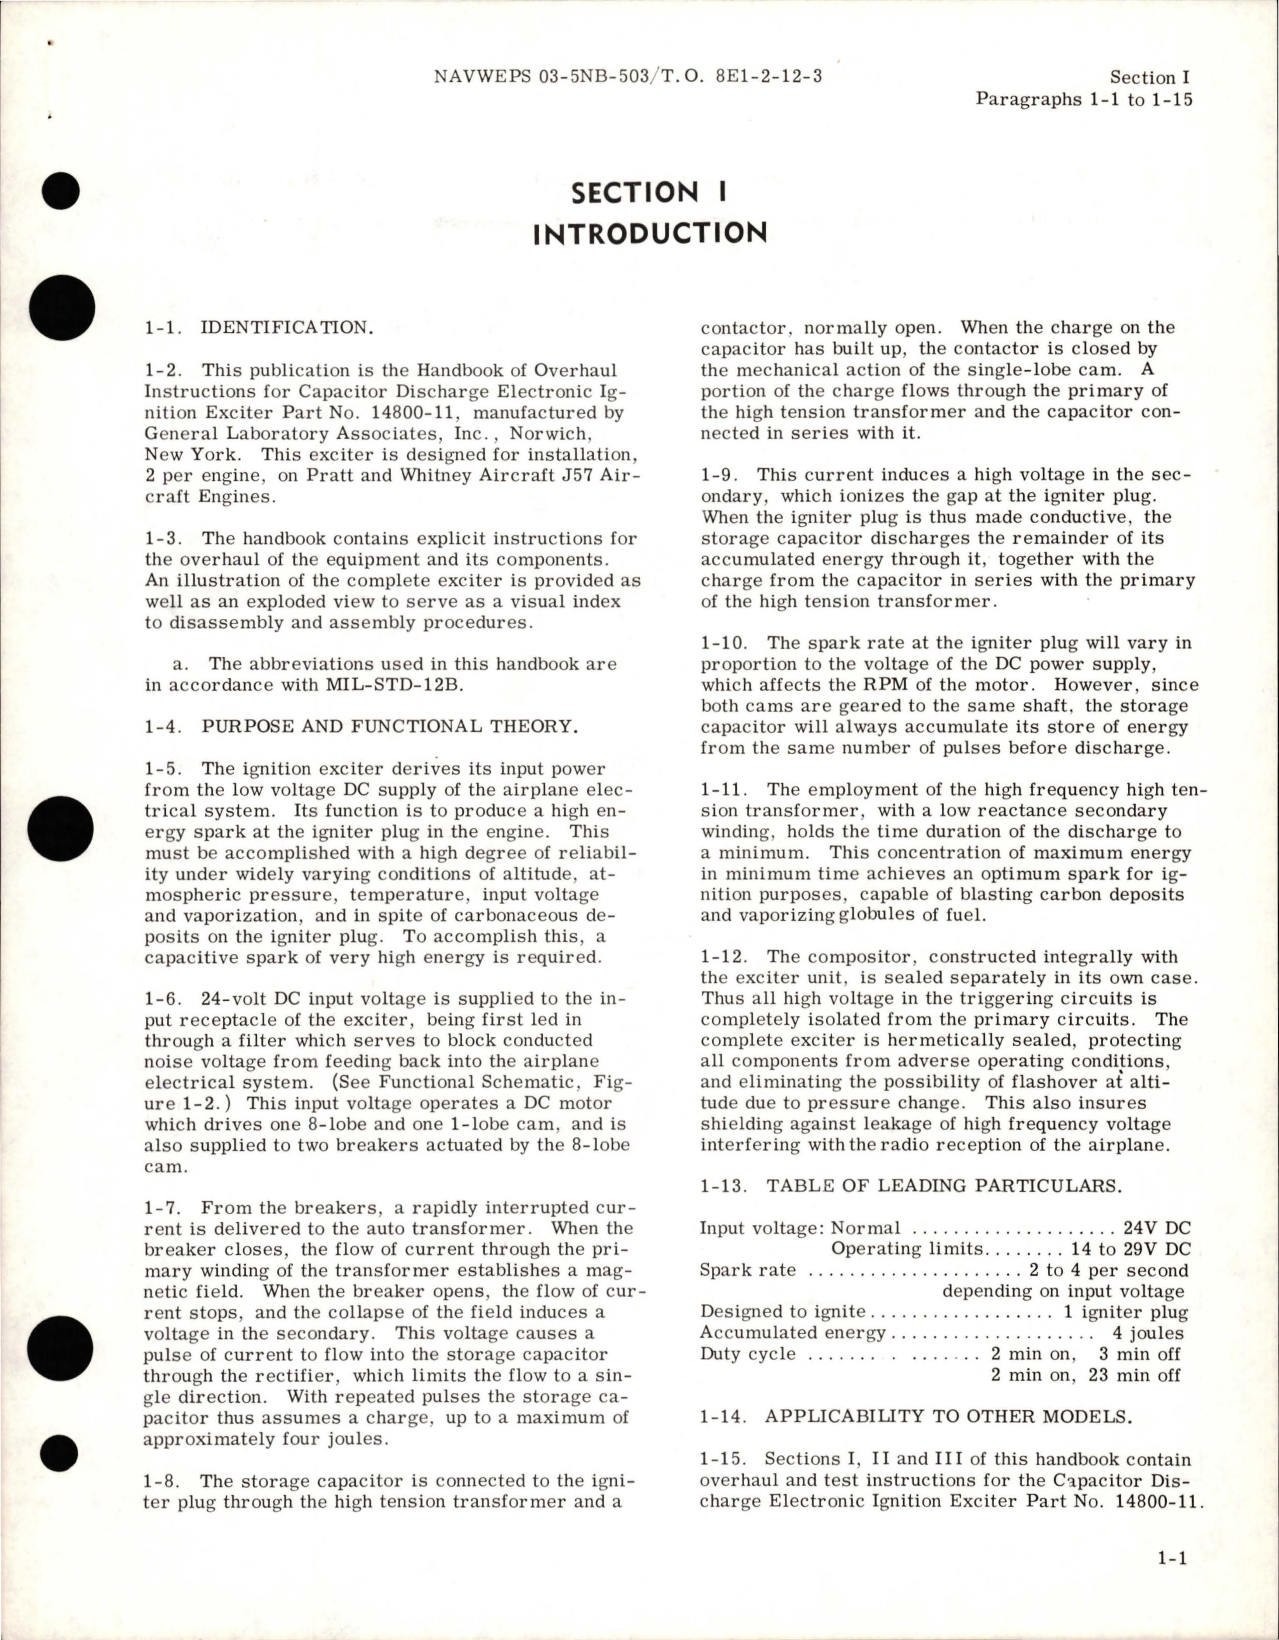 Sample page 5 from AirCorps Library document: Overhaul Instructions for Ignition Exciters - Parts 14800-11 and 15700-10 